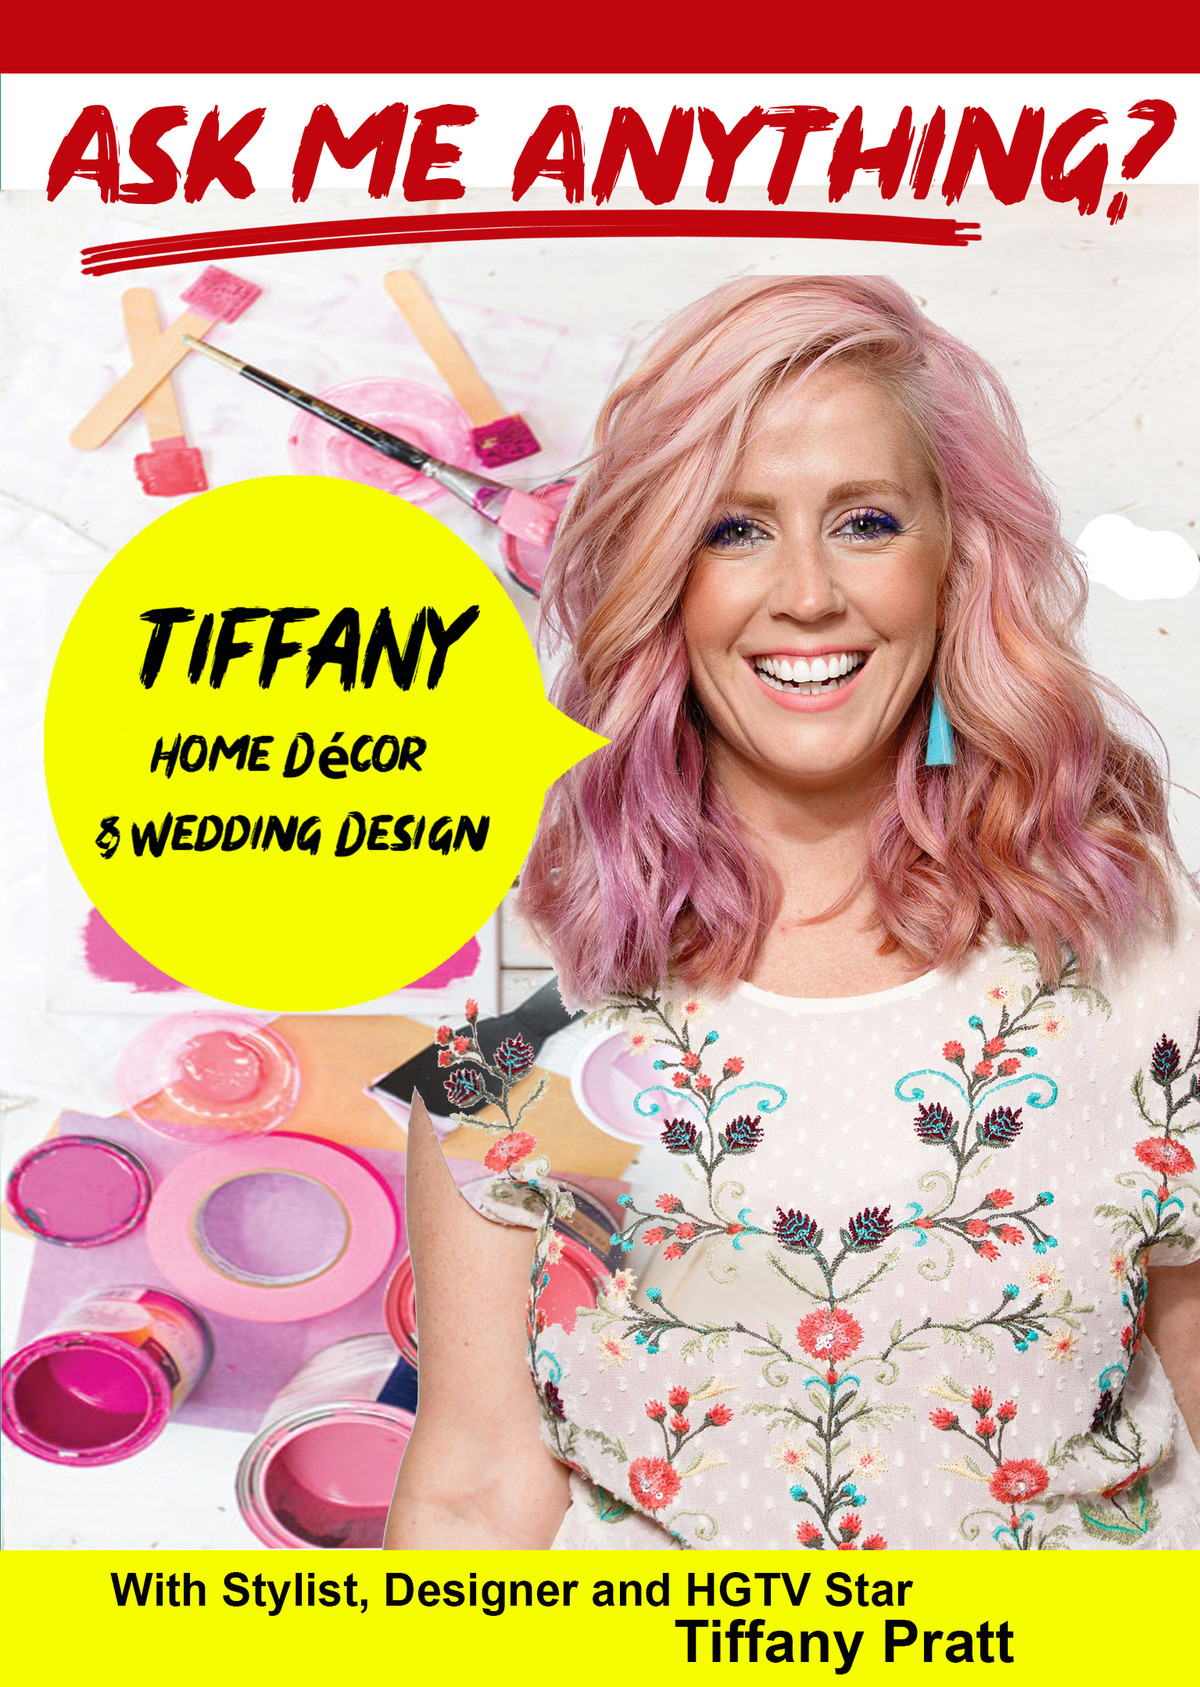 K4831 - Ask Me Anything about Home Decor & Wedding Design with Tiffany Pratt